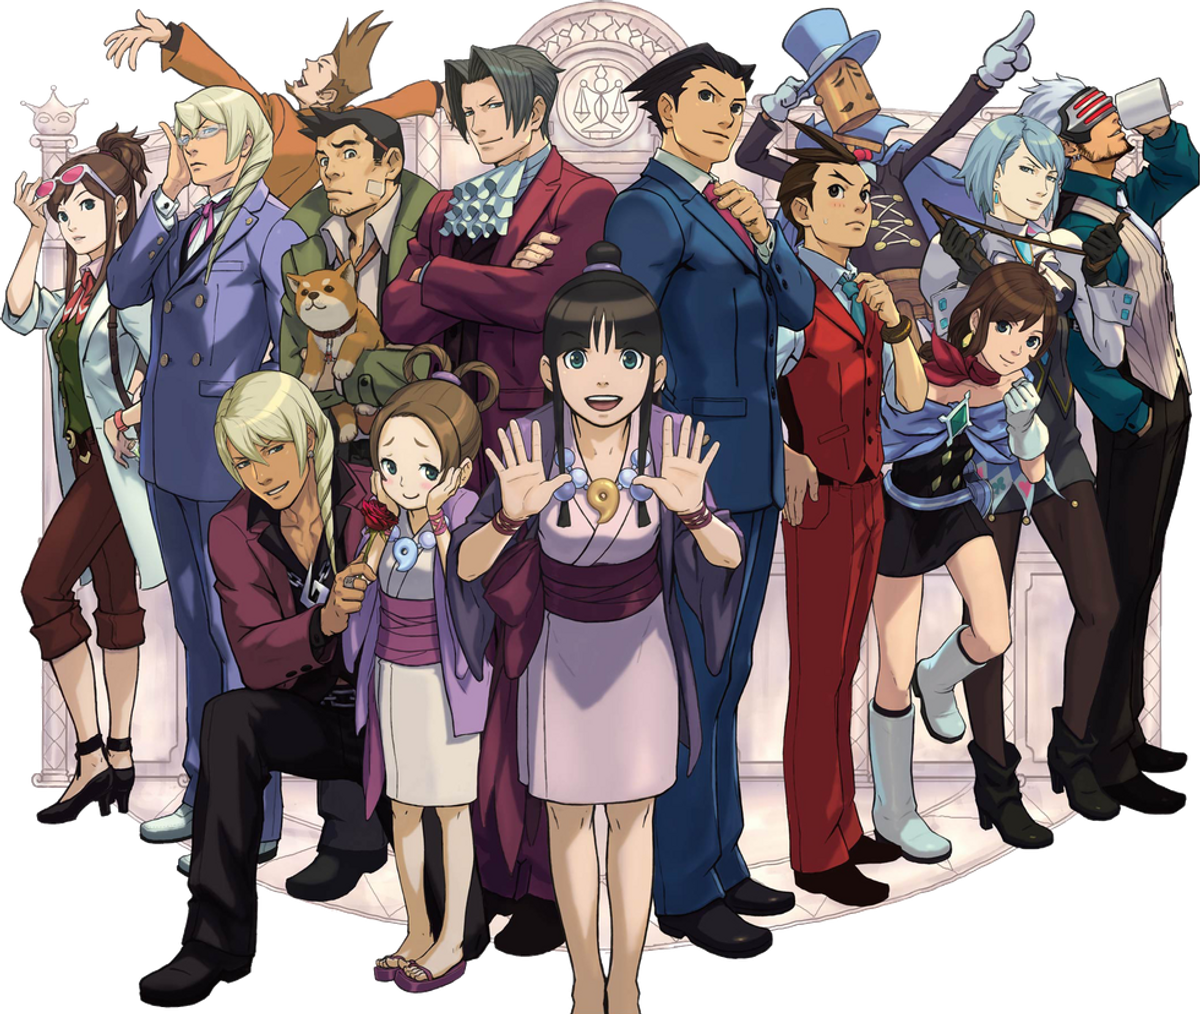 Video Game Spotlight: The Ace Attorney Series